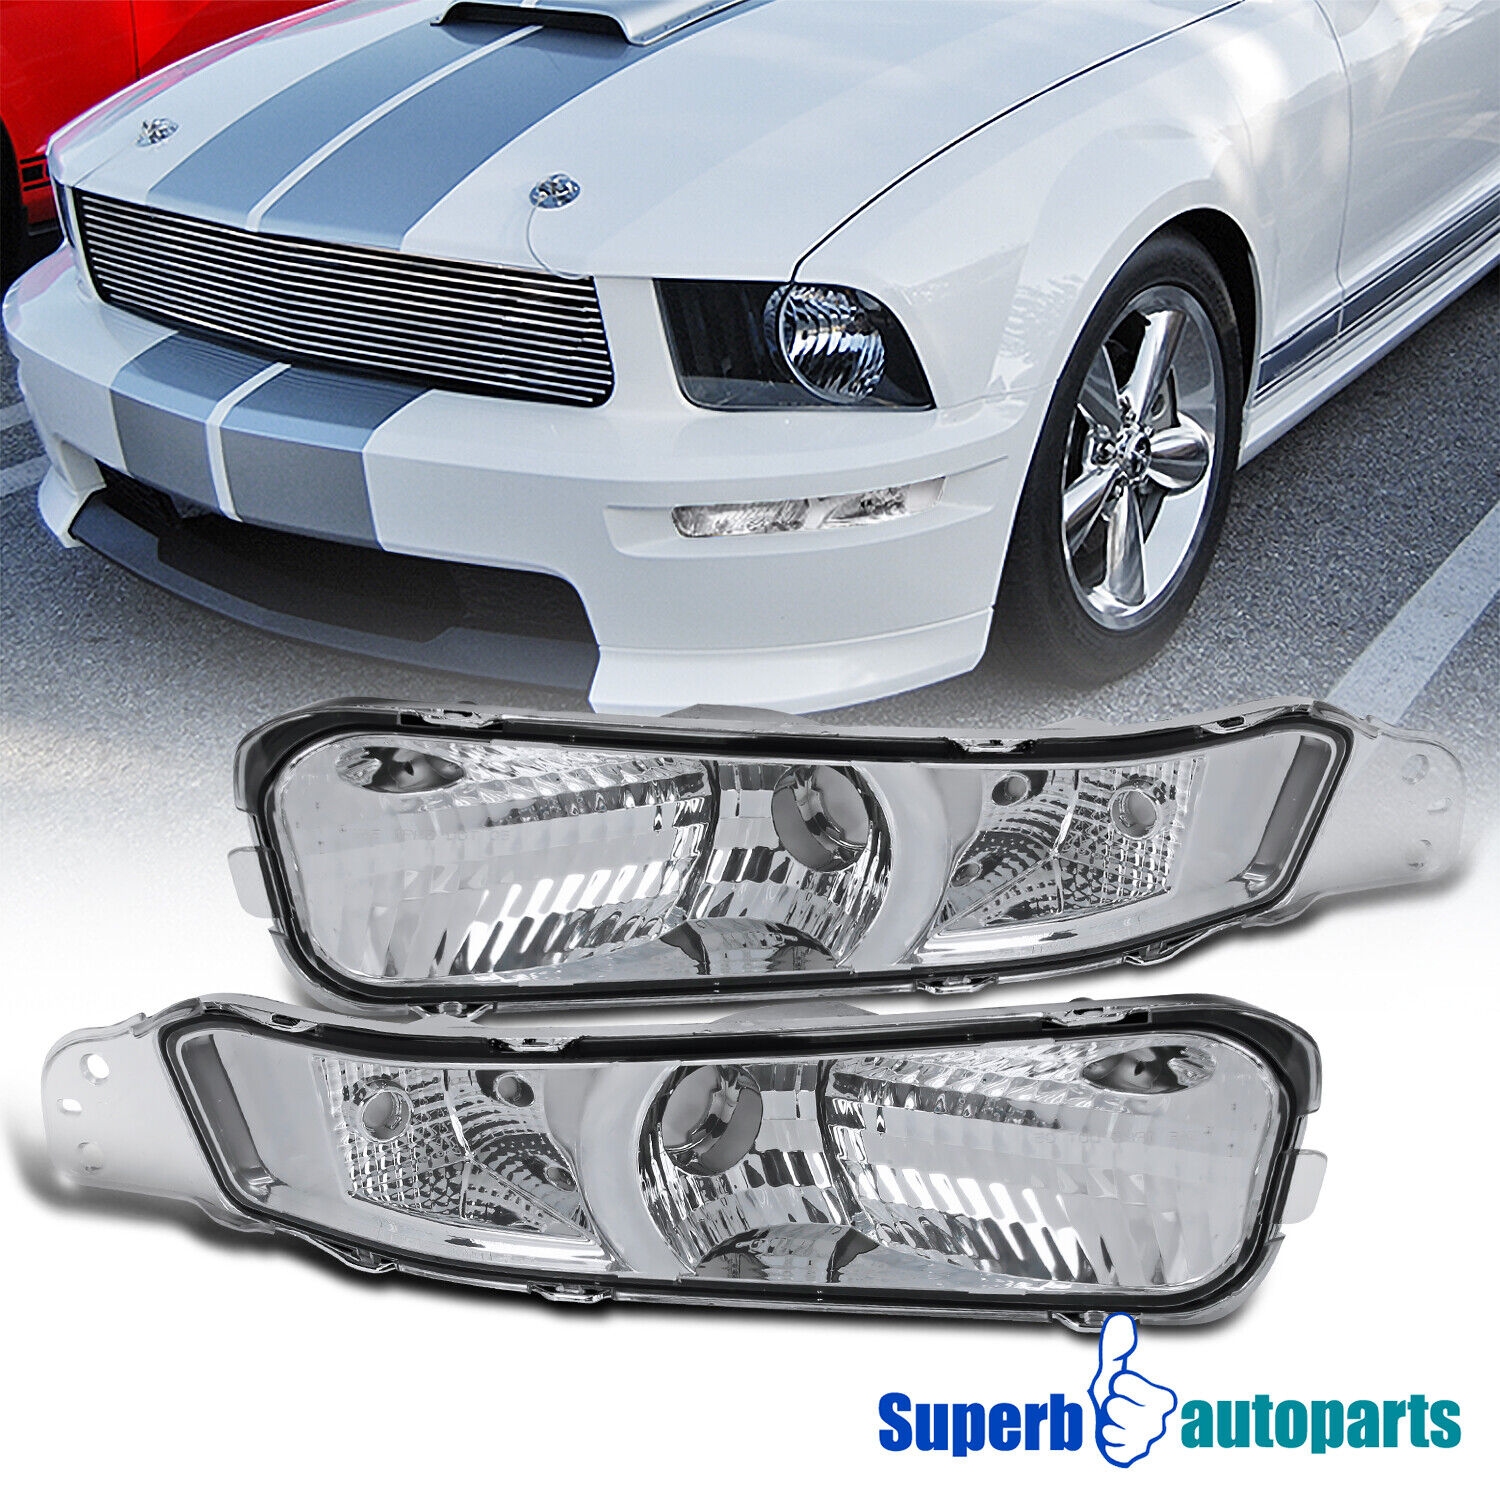 Fits 2005-2009 Ford Mustang Front Bumper Lights Signal Lamps 05-